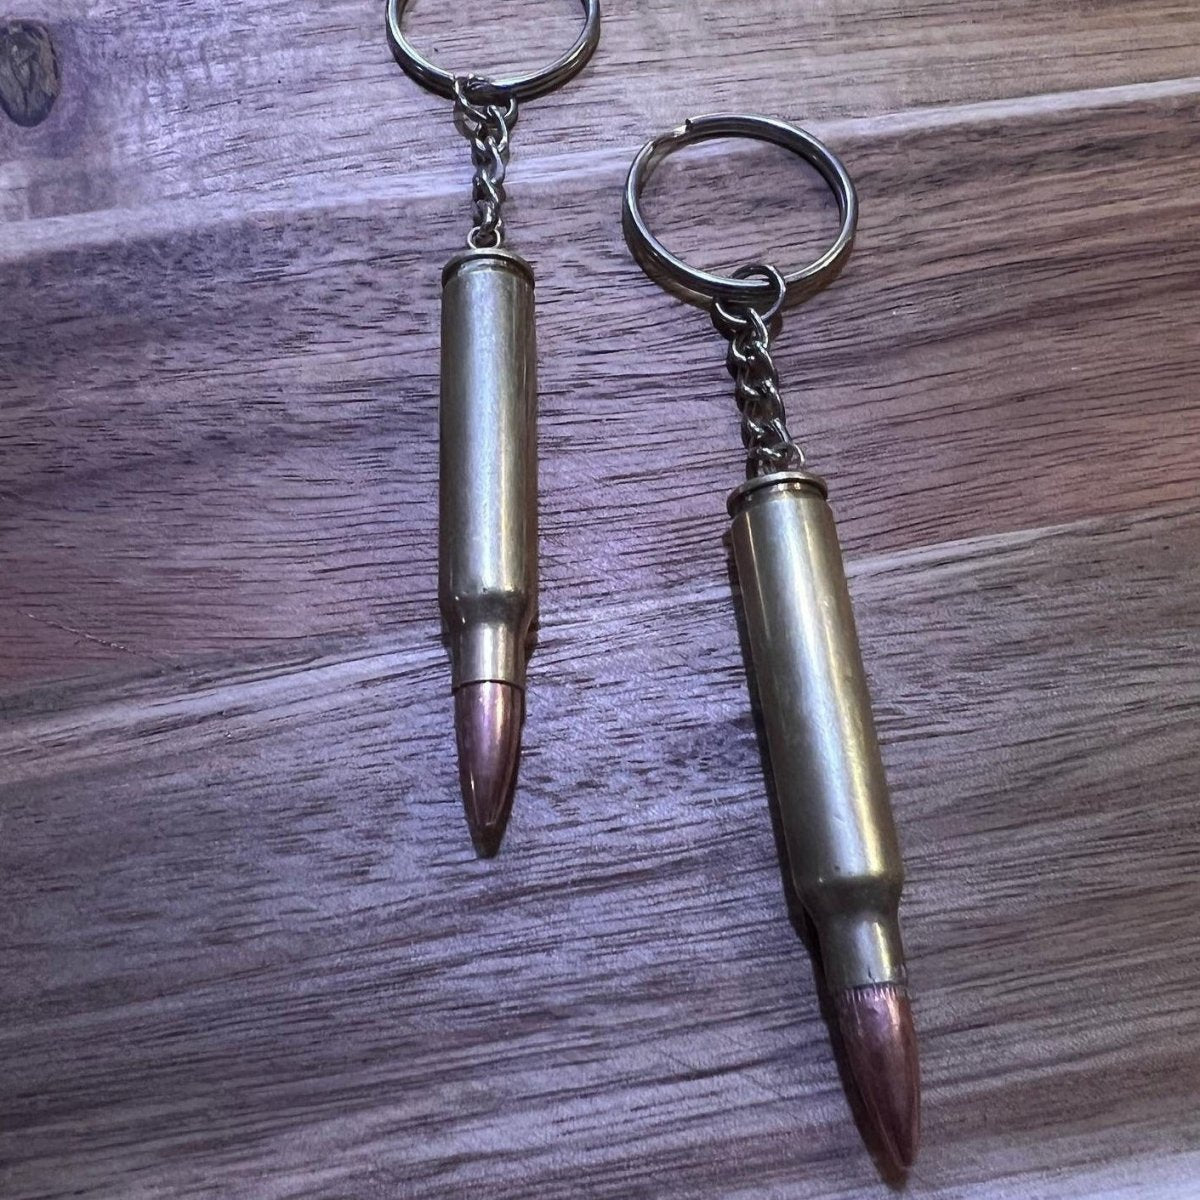 Replica Bullet Keychain - Up In Arms